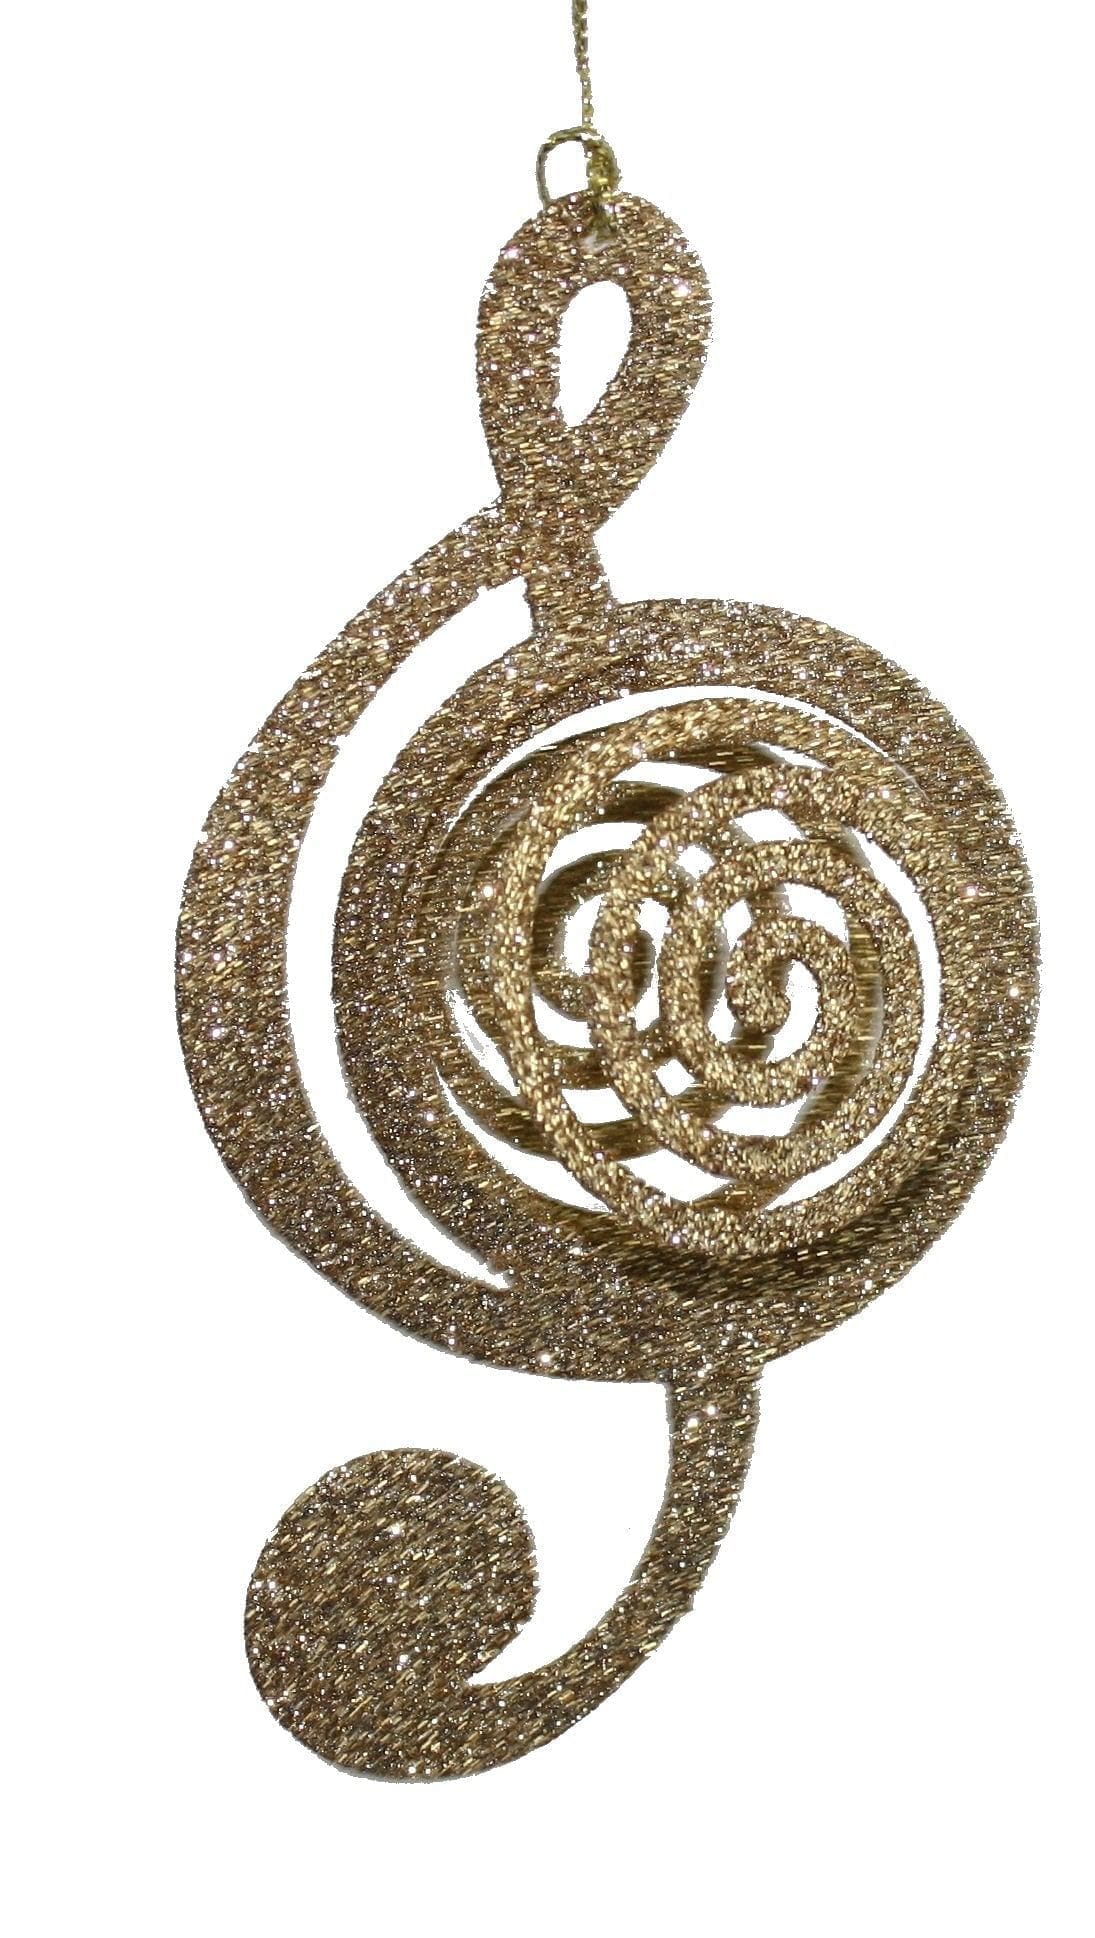 4.5 In. Mettalic Gold Glittered Music Ornament - Cleff - Shelburne Country Store